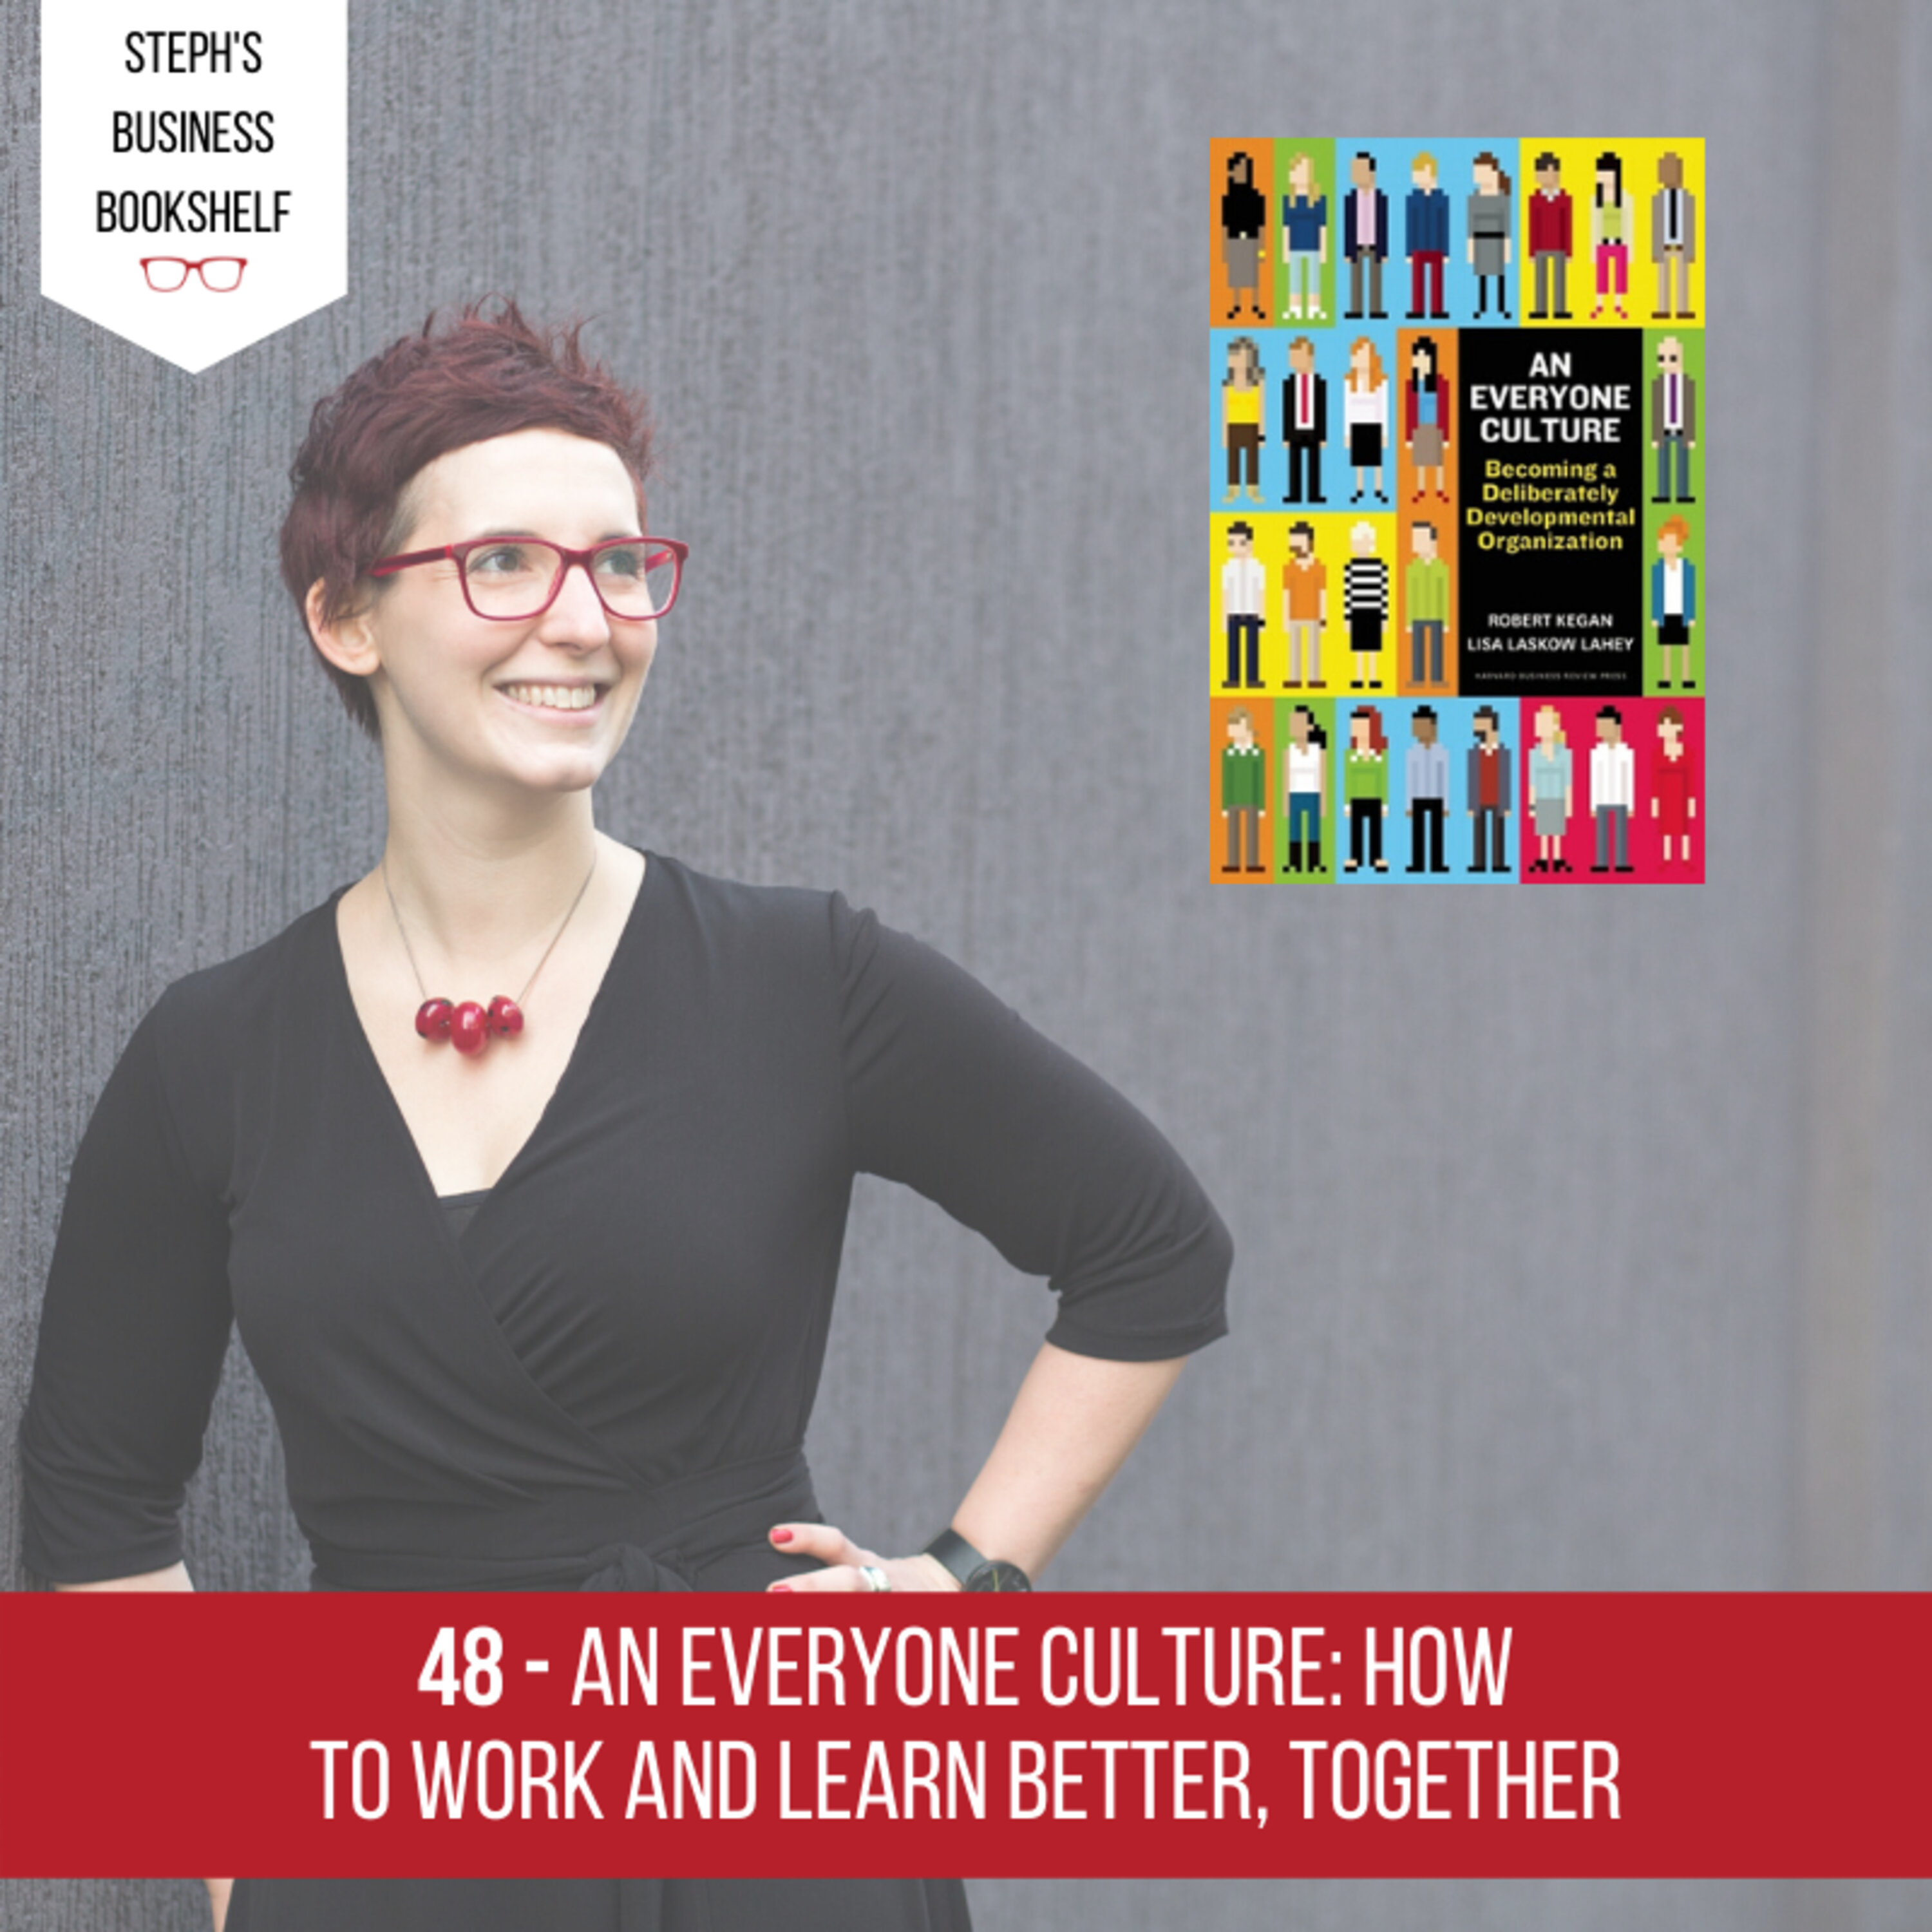 An Everyone Culture by Robert Kegan & Lisa Lahey: How to Work And Learn Better, Together